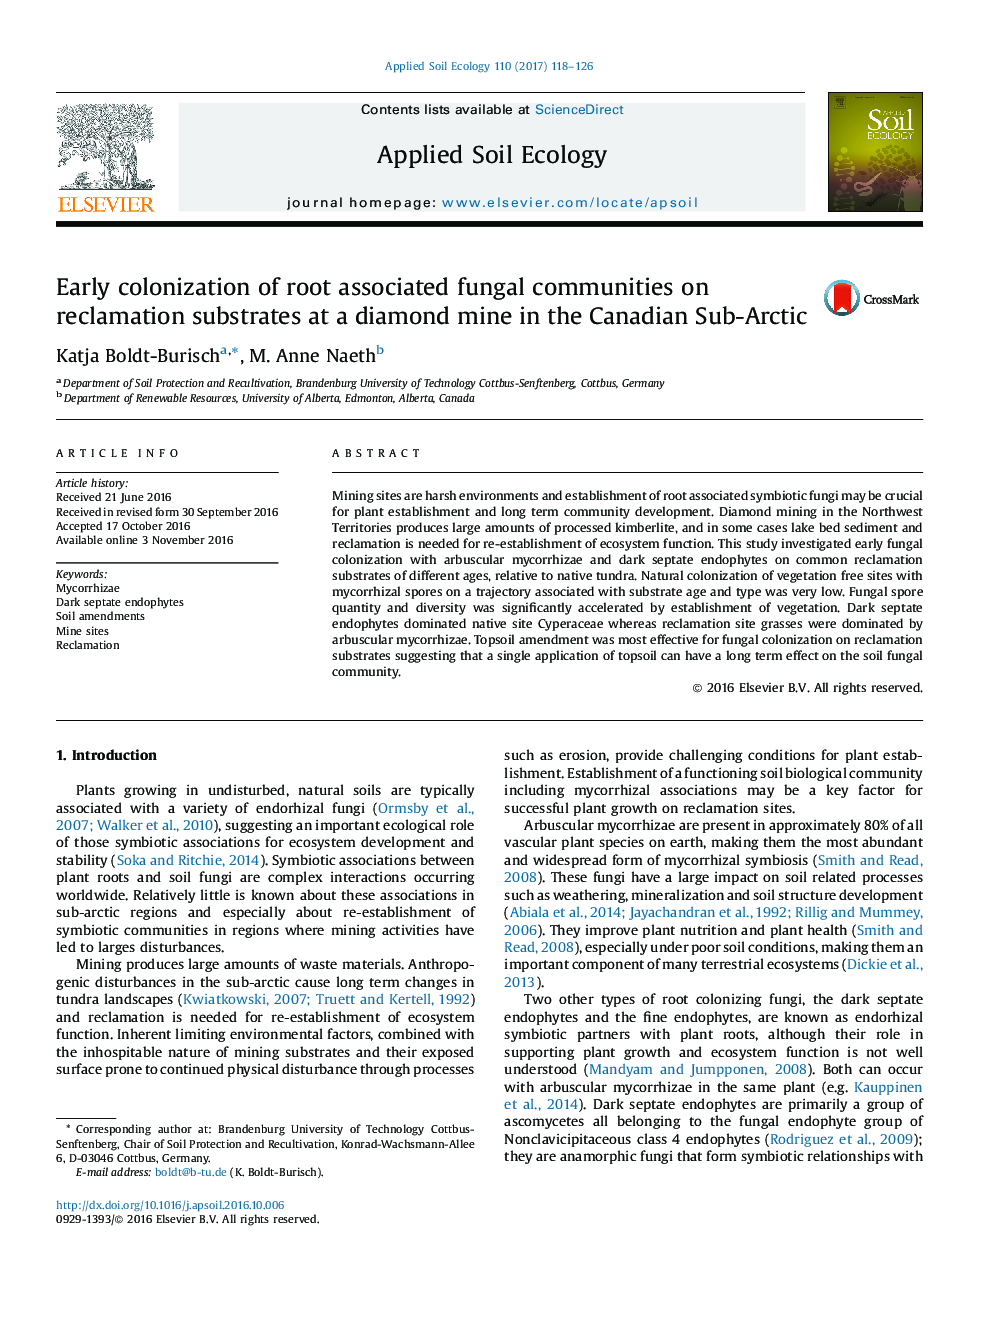 Early colonization of root associated fungal communities on reclamation substrates at a diamond mine in the Canadian Sub-Arctic